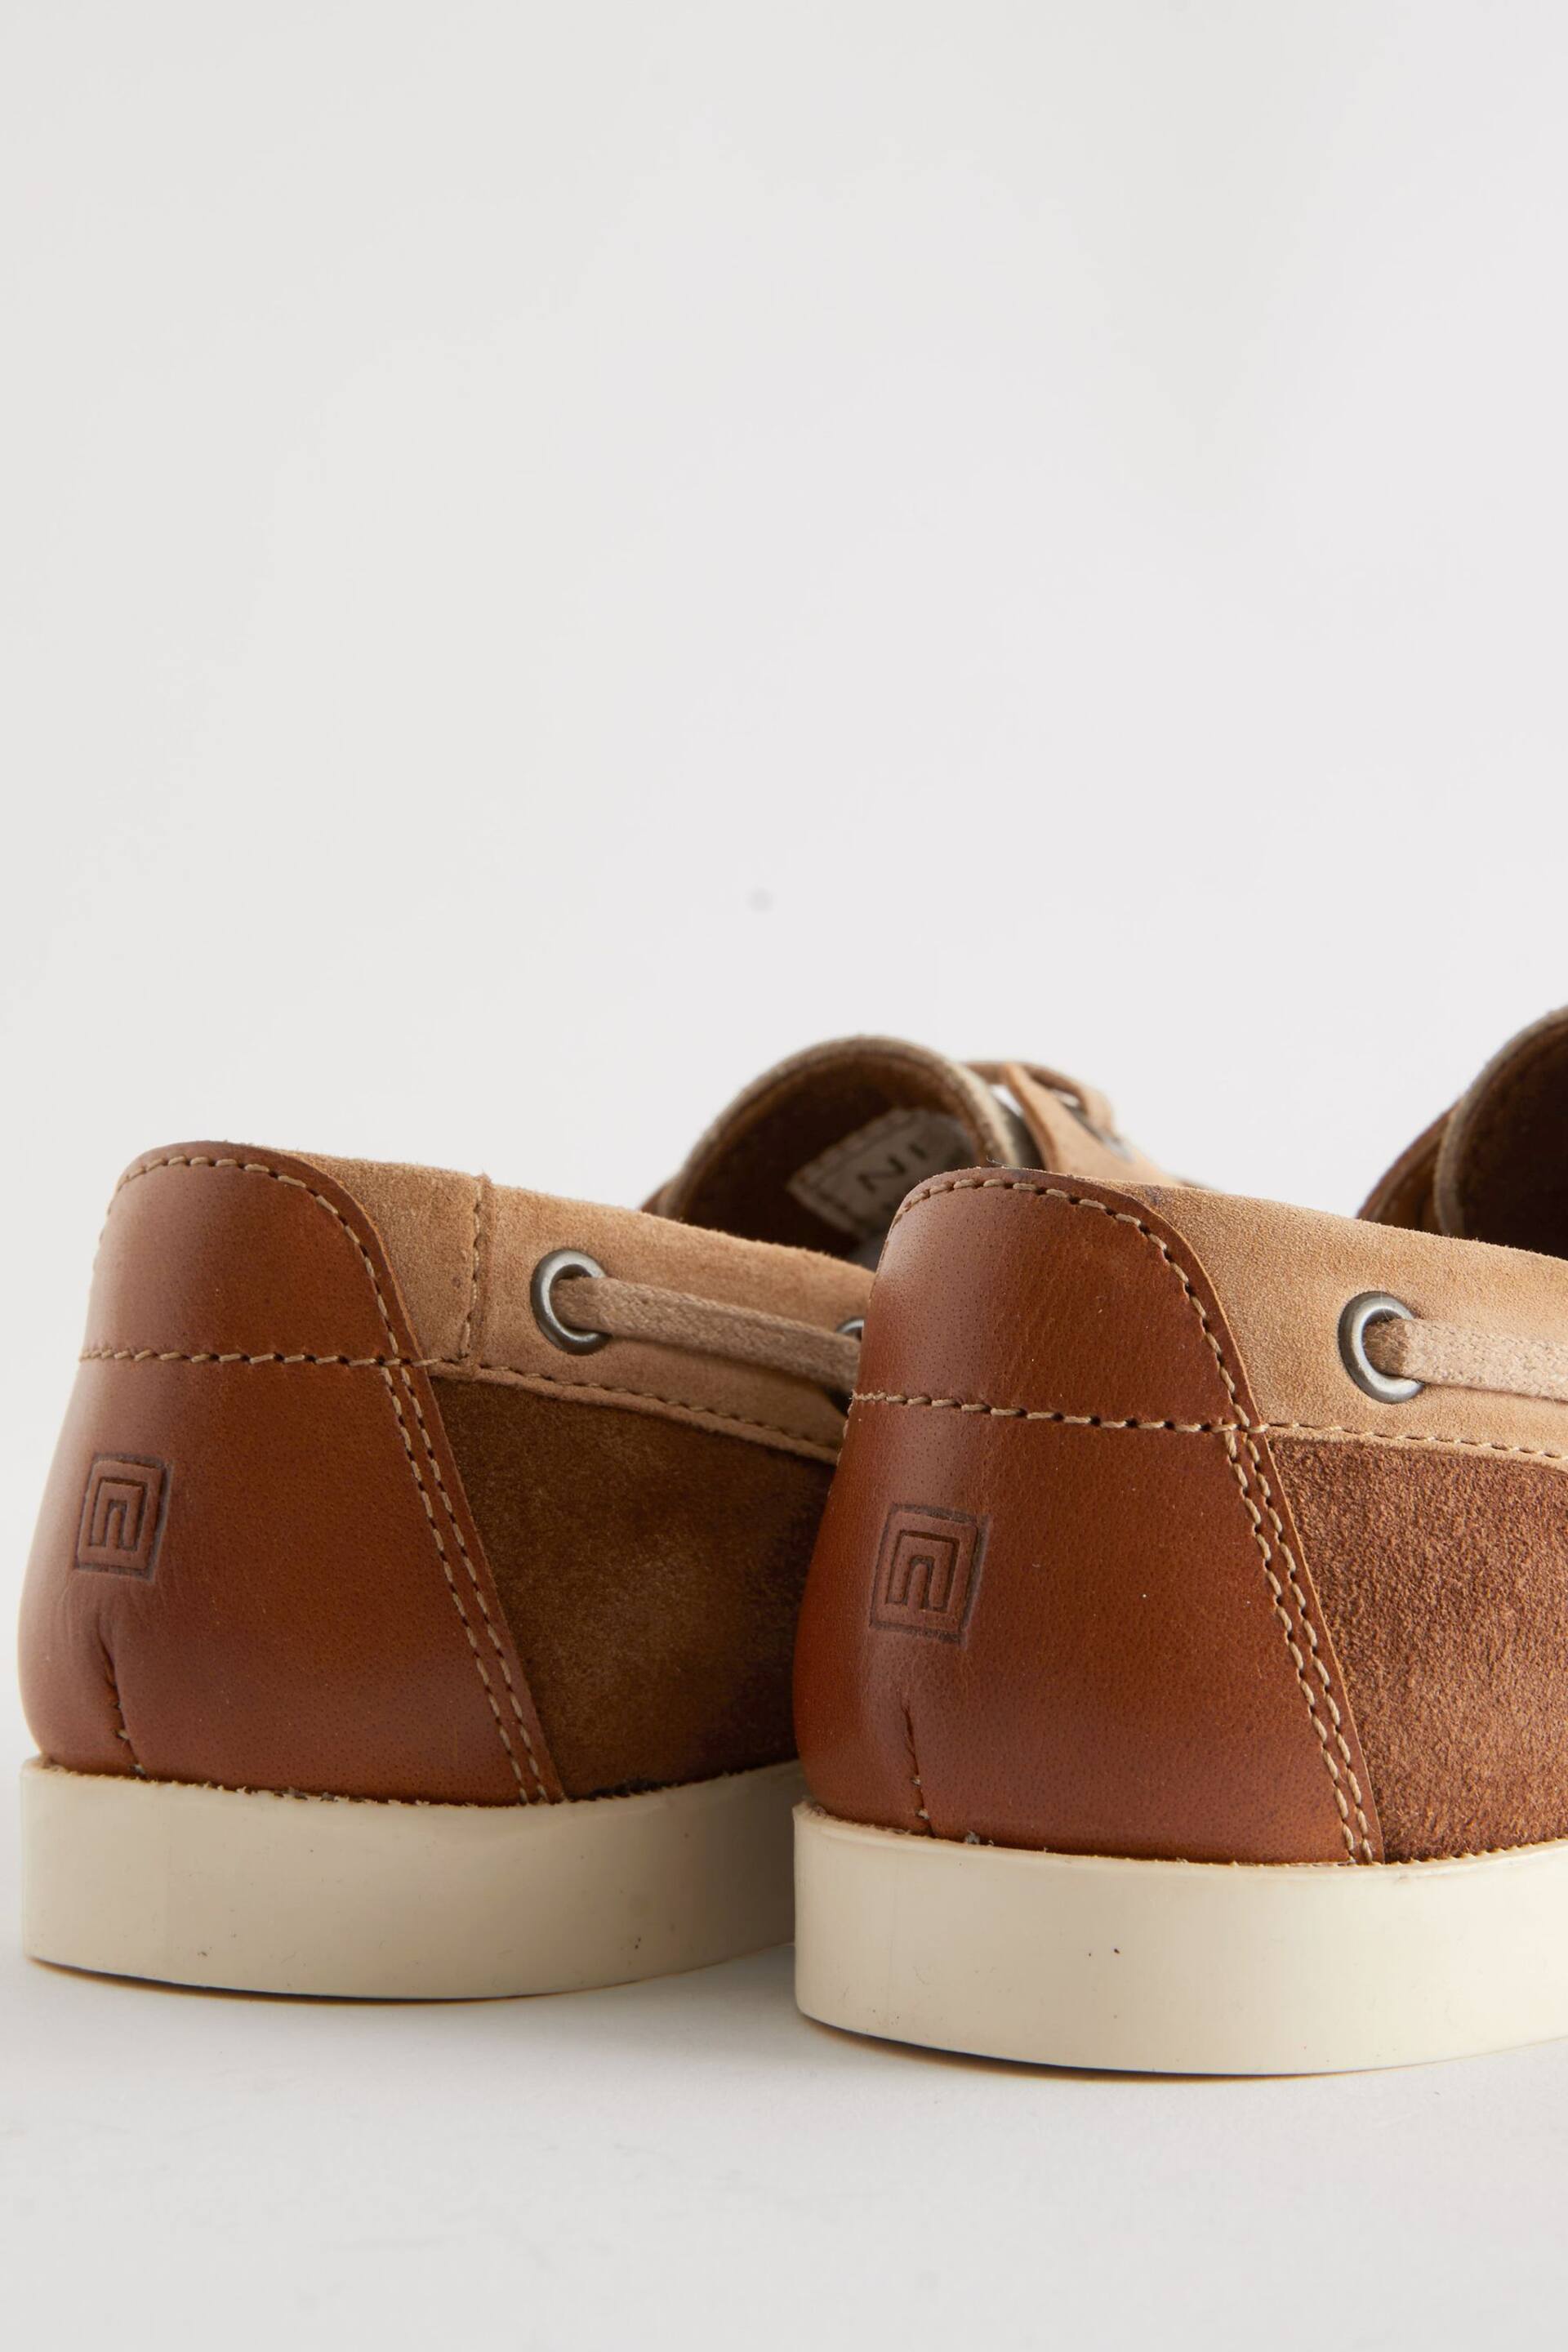 Neutral Leather Boat Shoes - Image 5 of 5